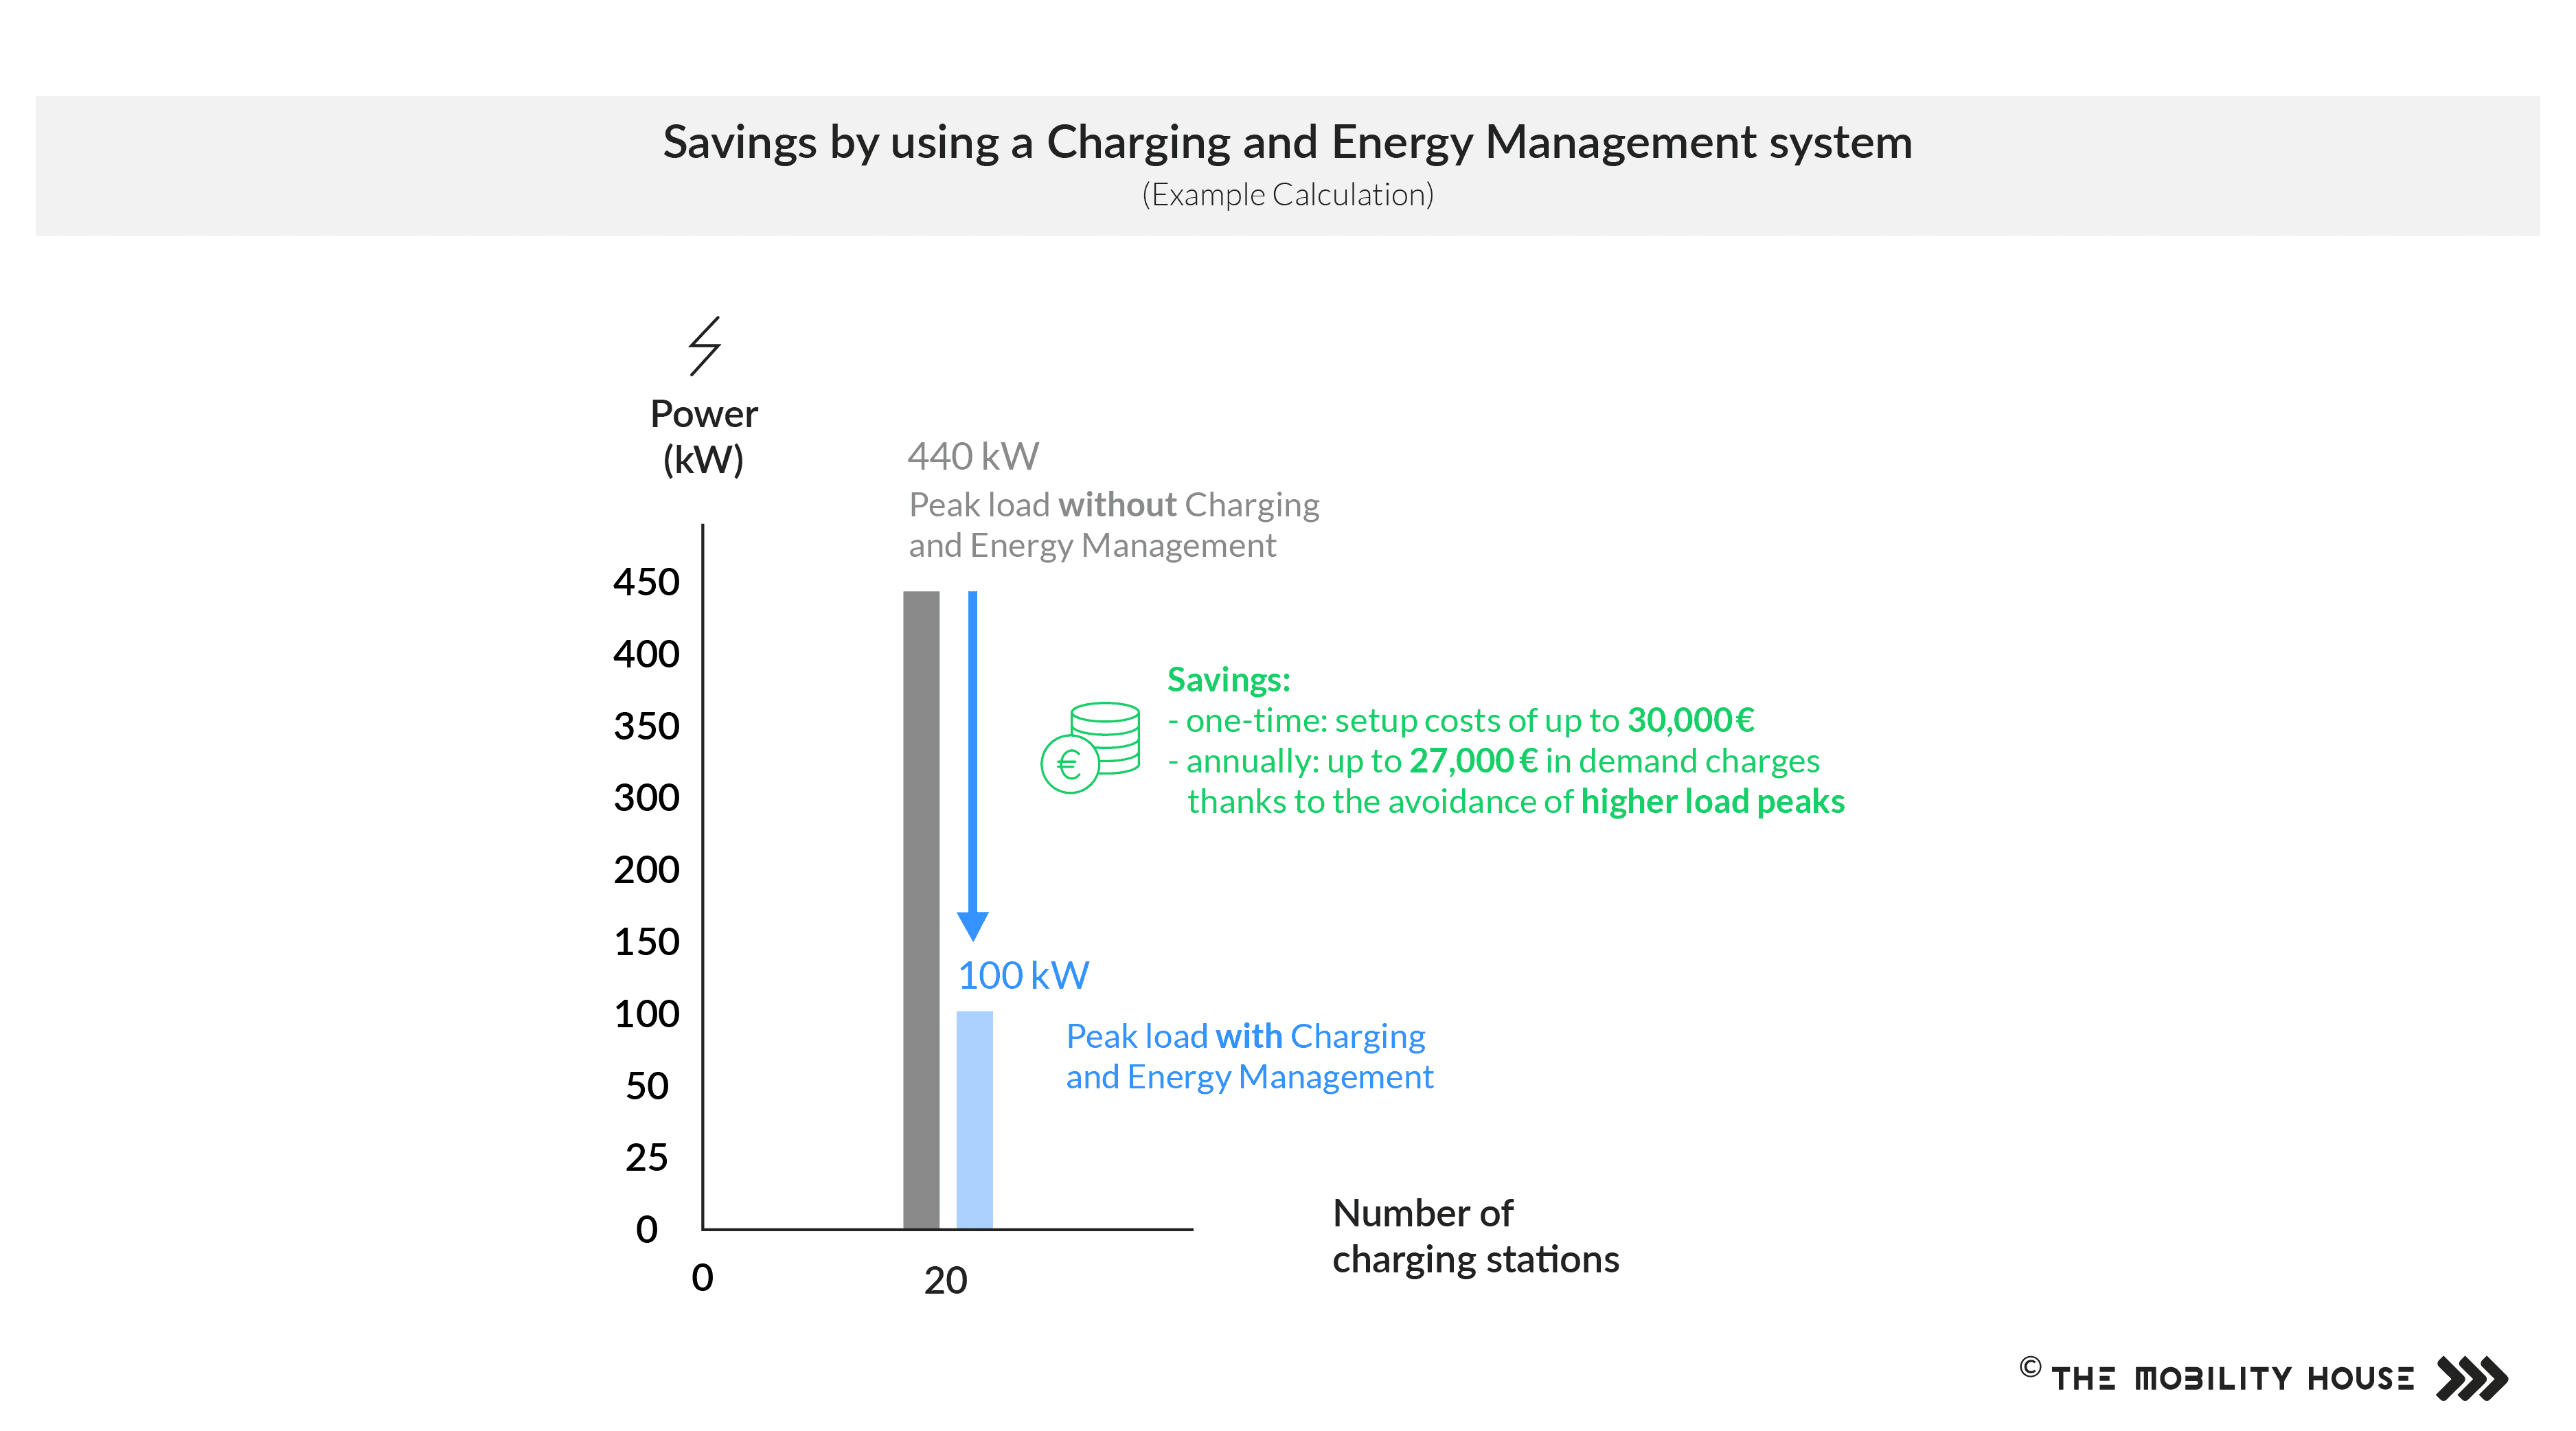 Graphics: savings by a charging and energy management system